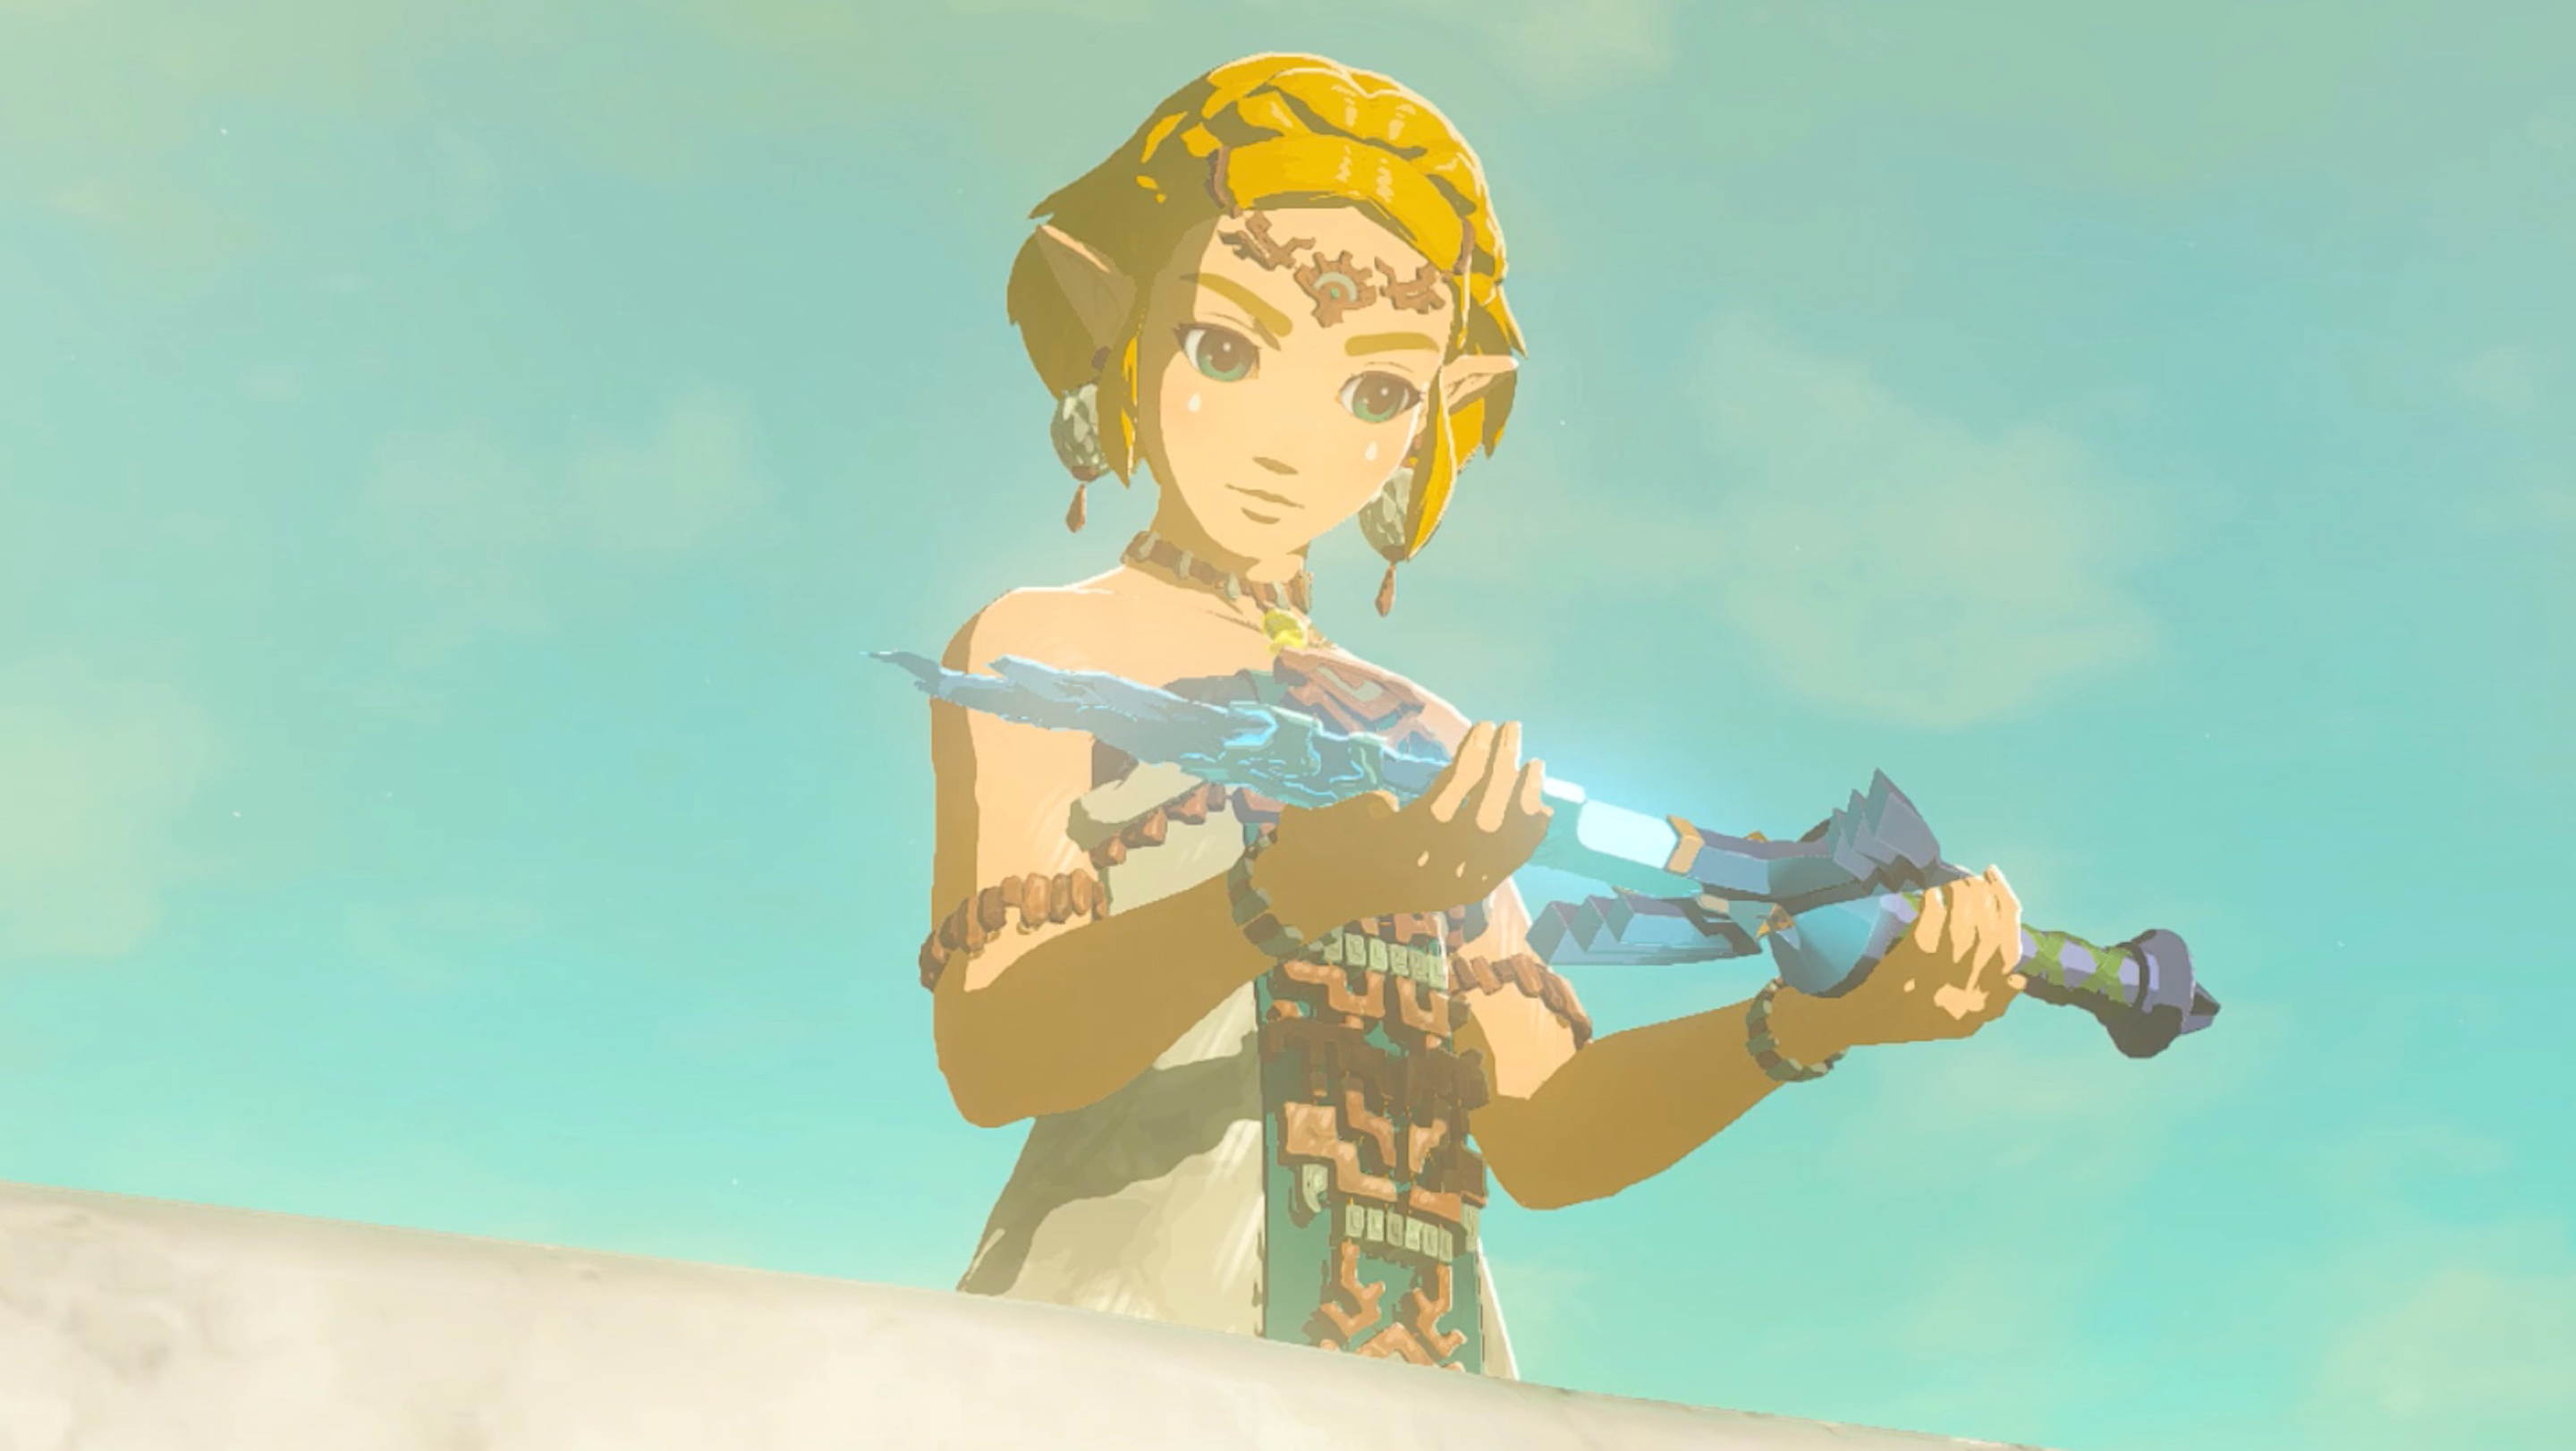 Princess Zelda, with a cool new short haircut, holds the master sword in both hands. The end of the sword is covered in a black sludge.